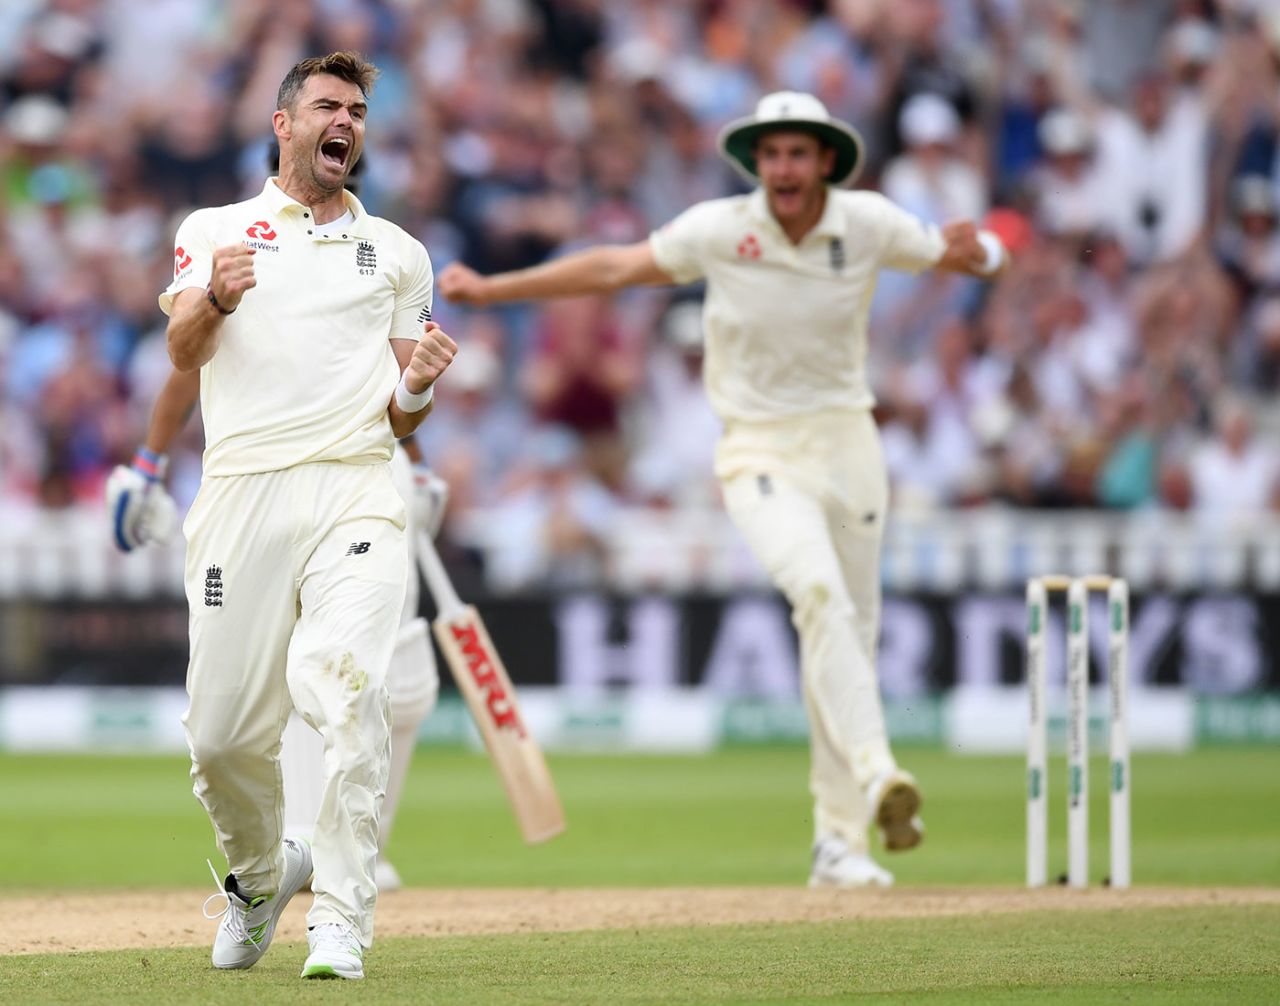 James Anderson removed R Ashwin for the second time in the Test, England v India, 1st Test, 3rd day, Edgbaston, August 3, 2018